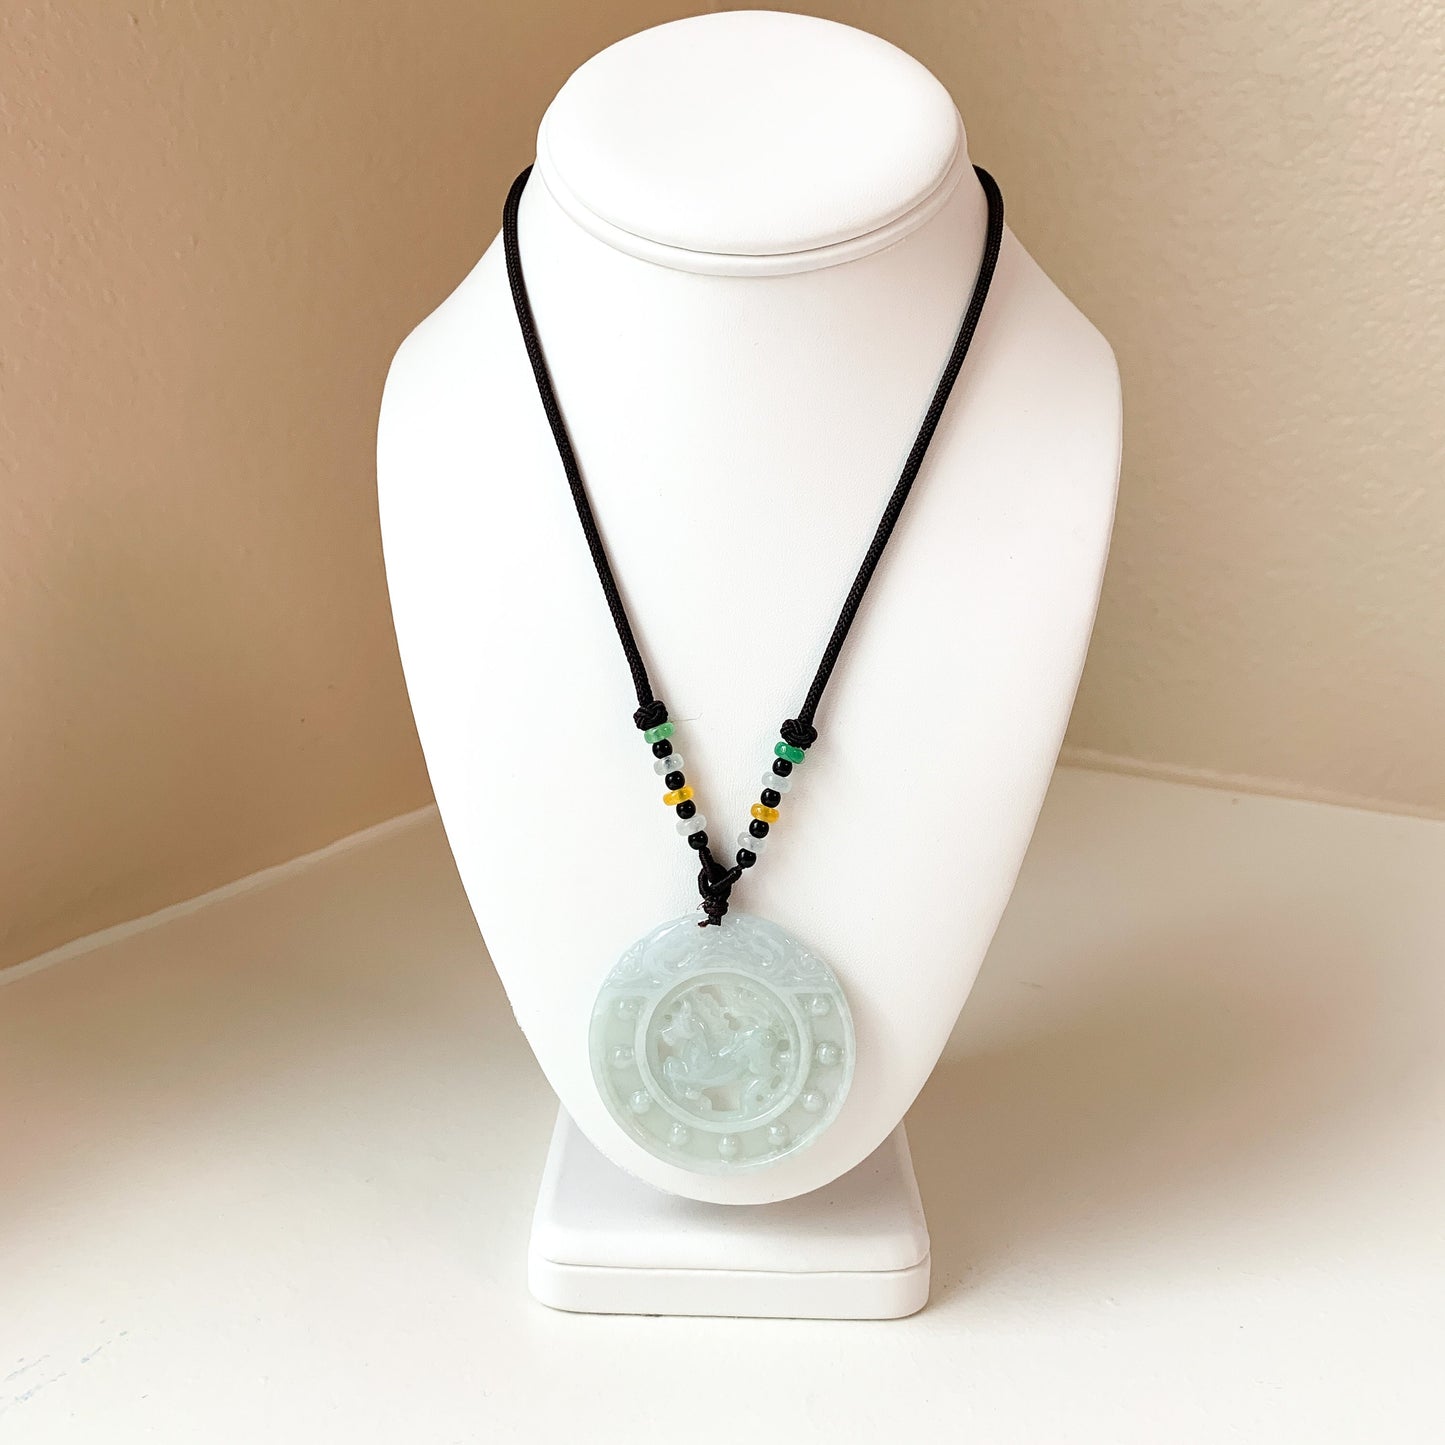 Jadeite Jade Spinning Horse Chinese Zodiac Carved Pendant Necklace, YJ-0321-0358103 - AriaDesignCollection